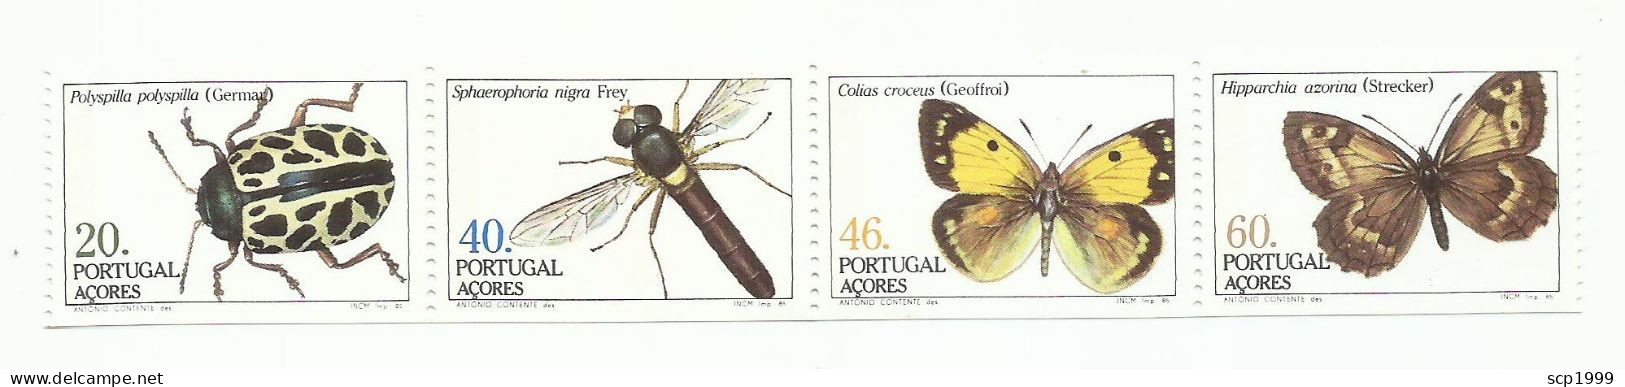 Portugal 1985 - Azores Insects Booklet MNH - Carnets